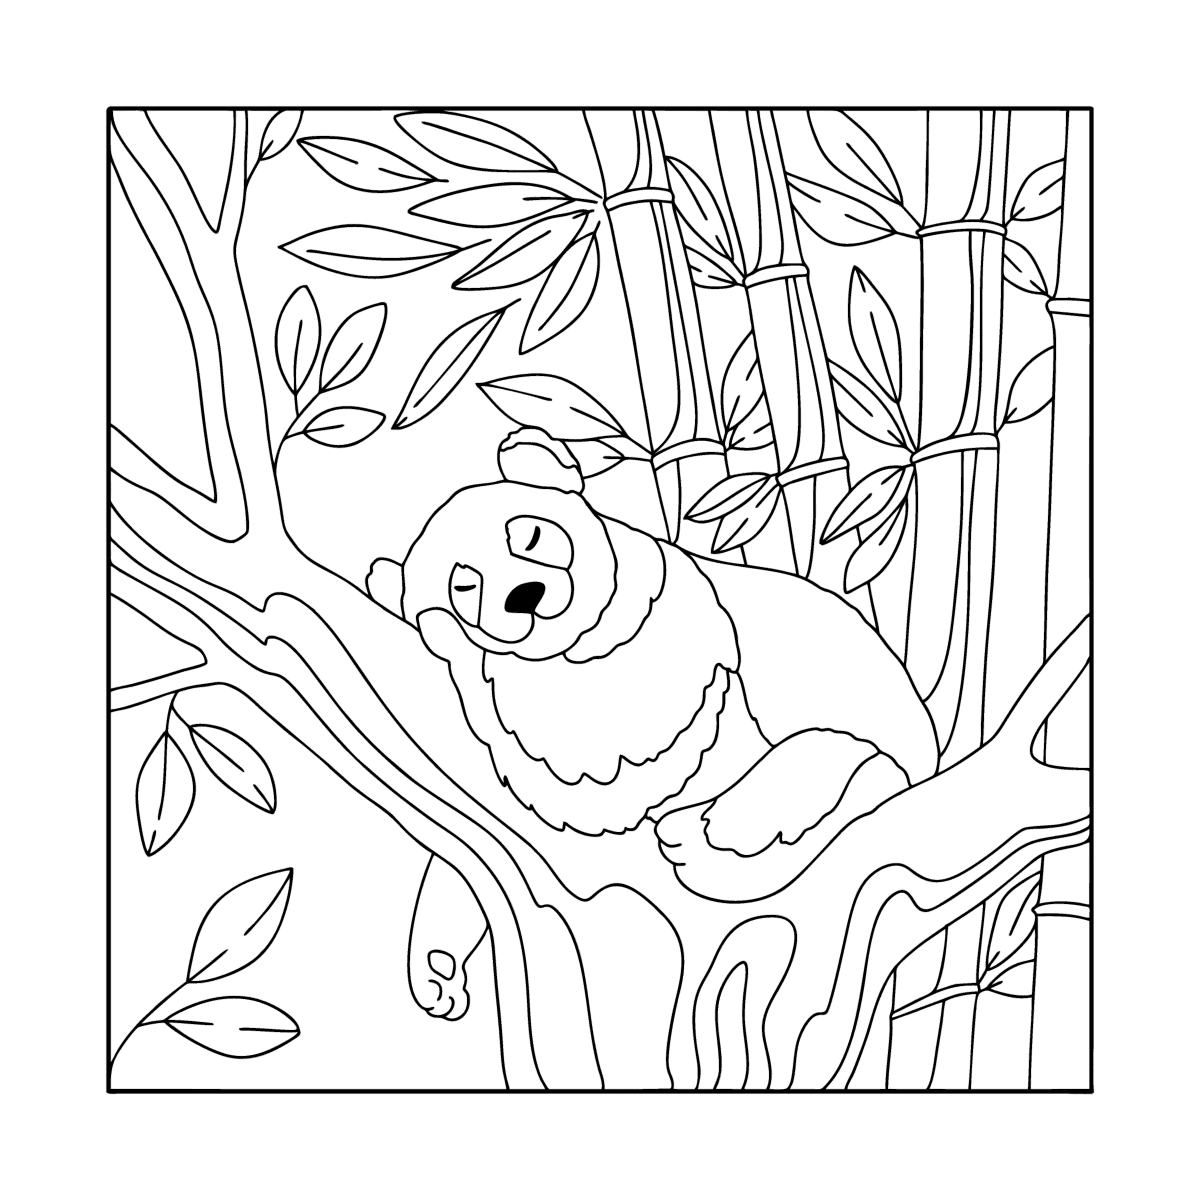 Pandas in nature - Pandas coloring pages for Adults online